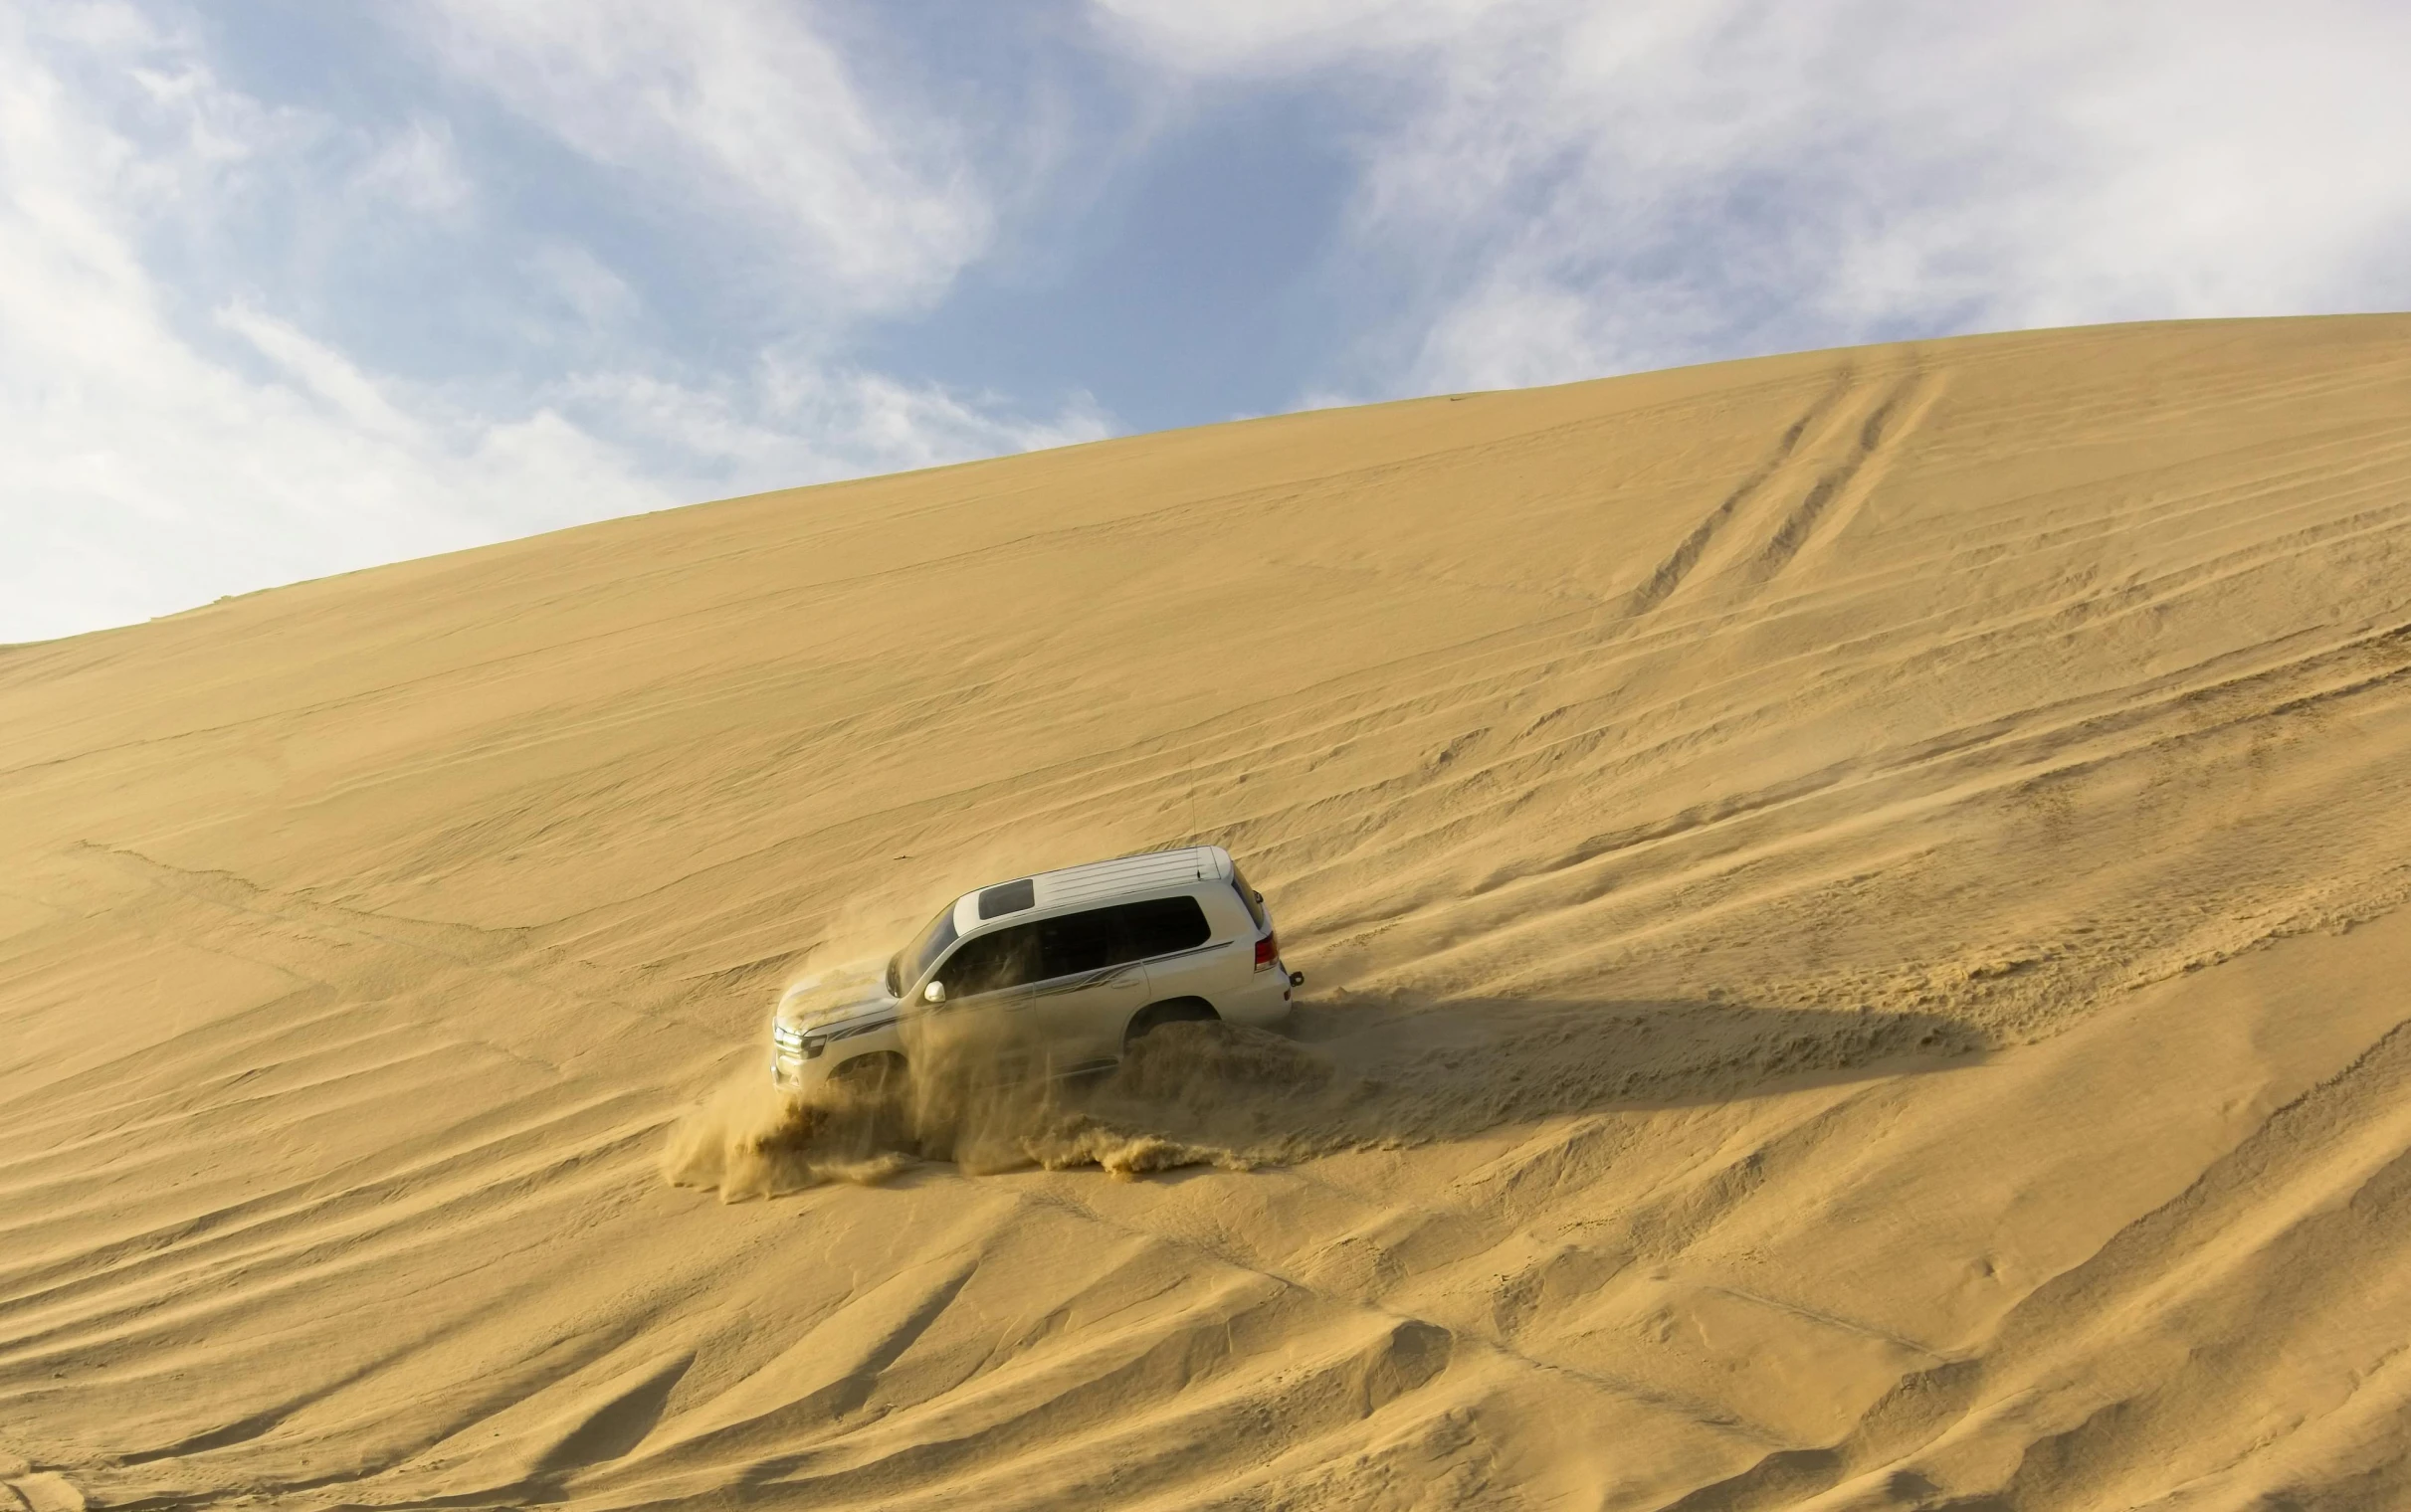 a truck that is driving in the sand, head down, 1km tall, profile image, detailing